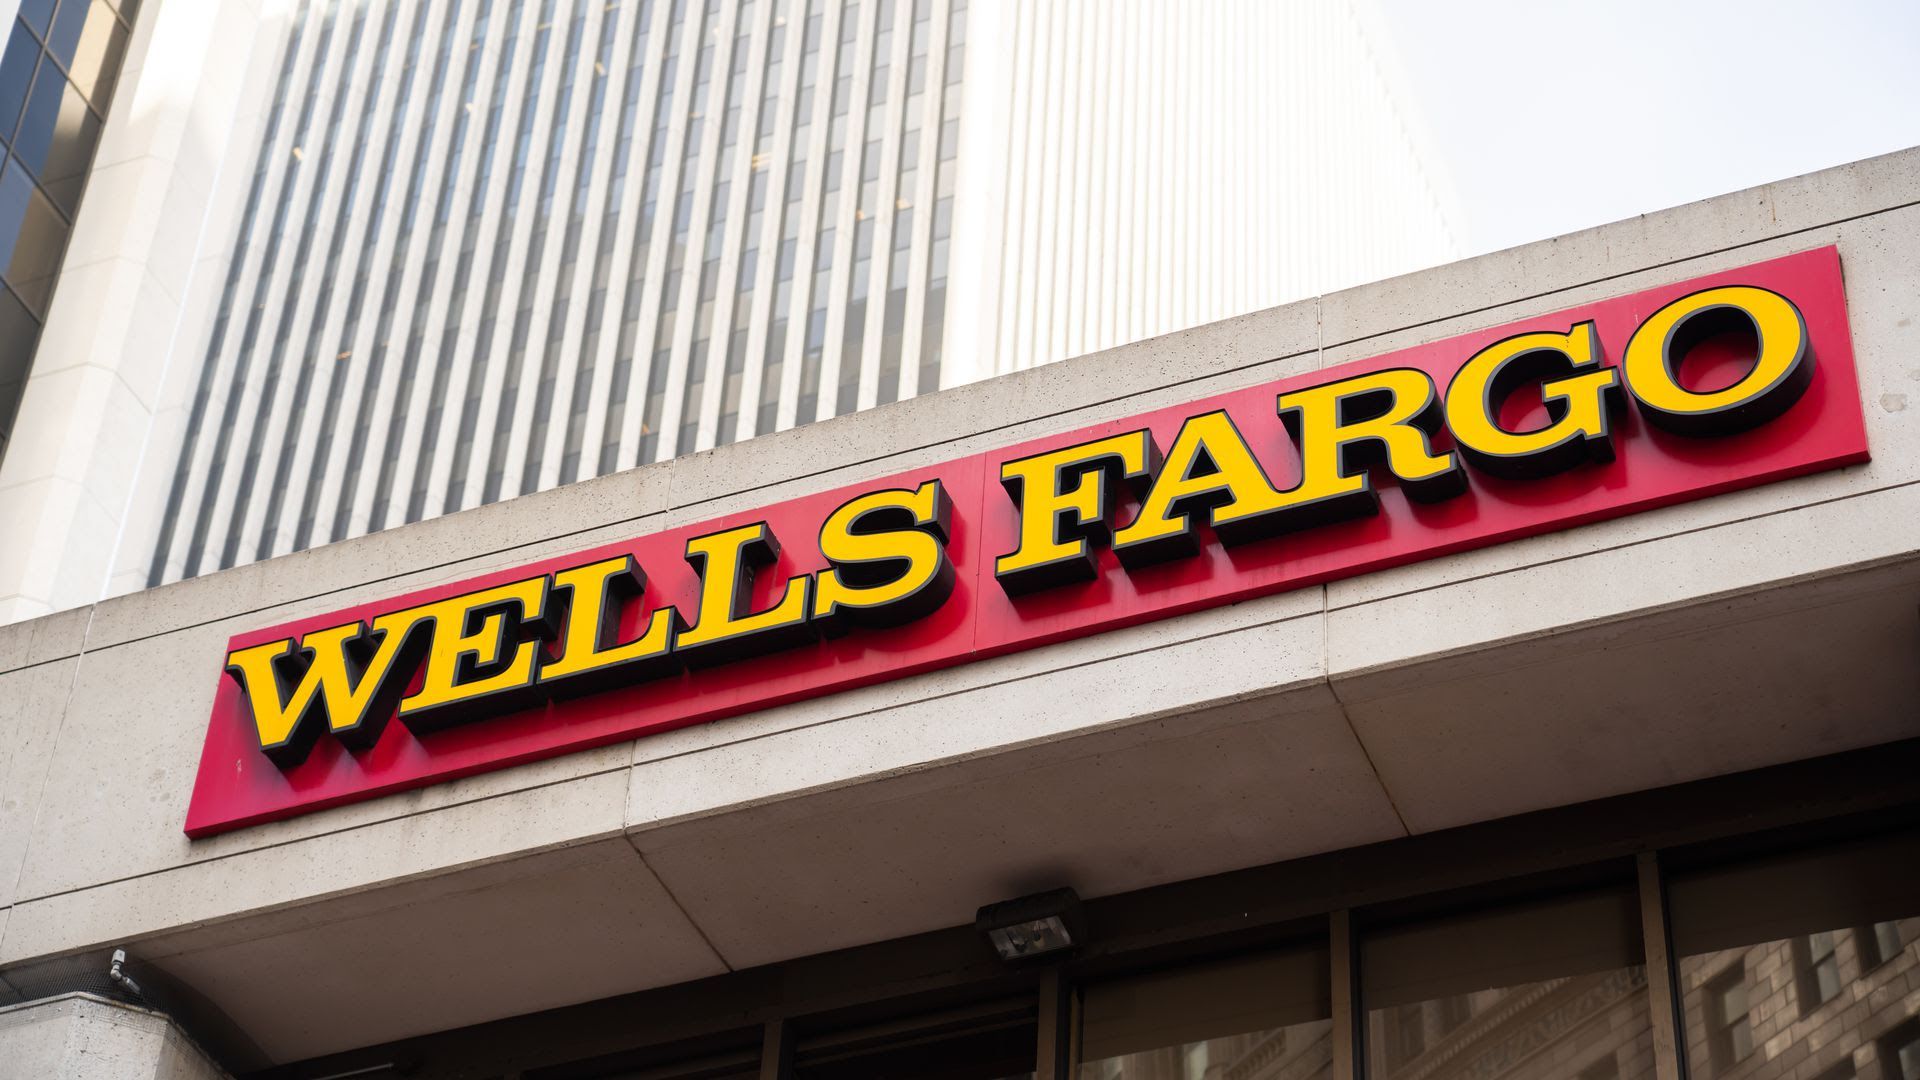 Image showing the Wells Fargo logo on a building.